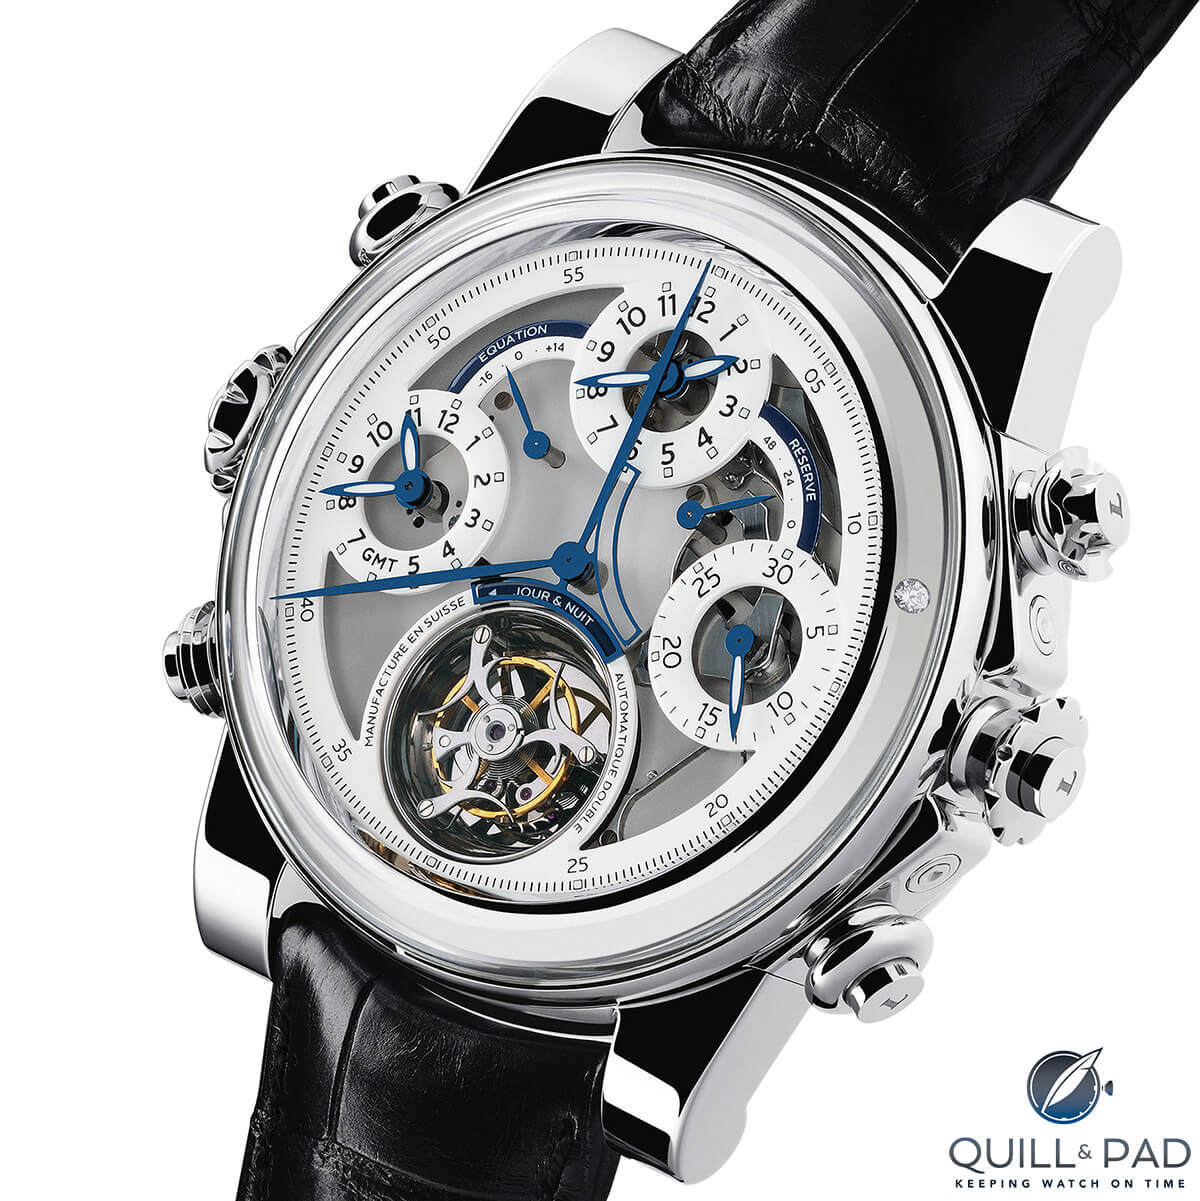 The time indication side of the Dominique Loiseau 1f4 featuring among other indications a split seconds chronograph, power reserve, equation of time, GMT, flying tourbillon and peripheral automatic winding rotor with a single embedded diamond